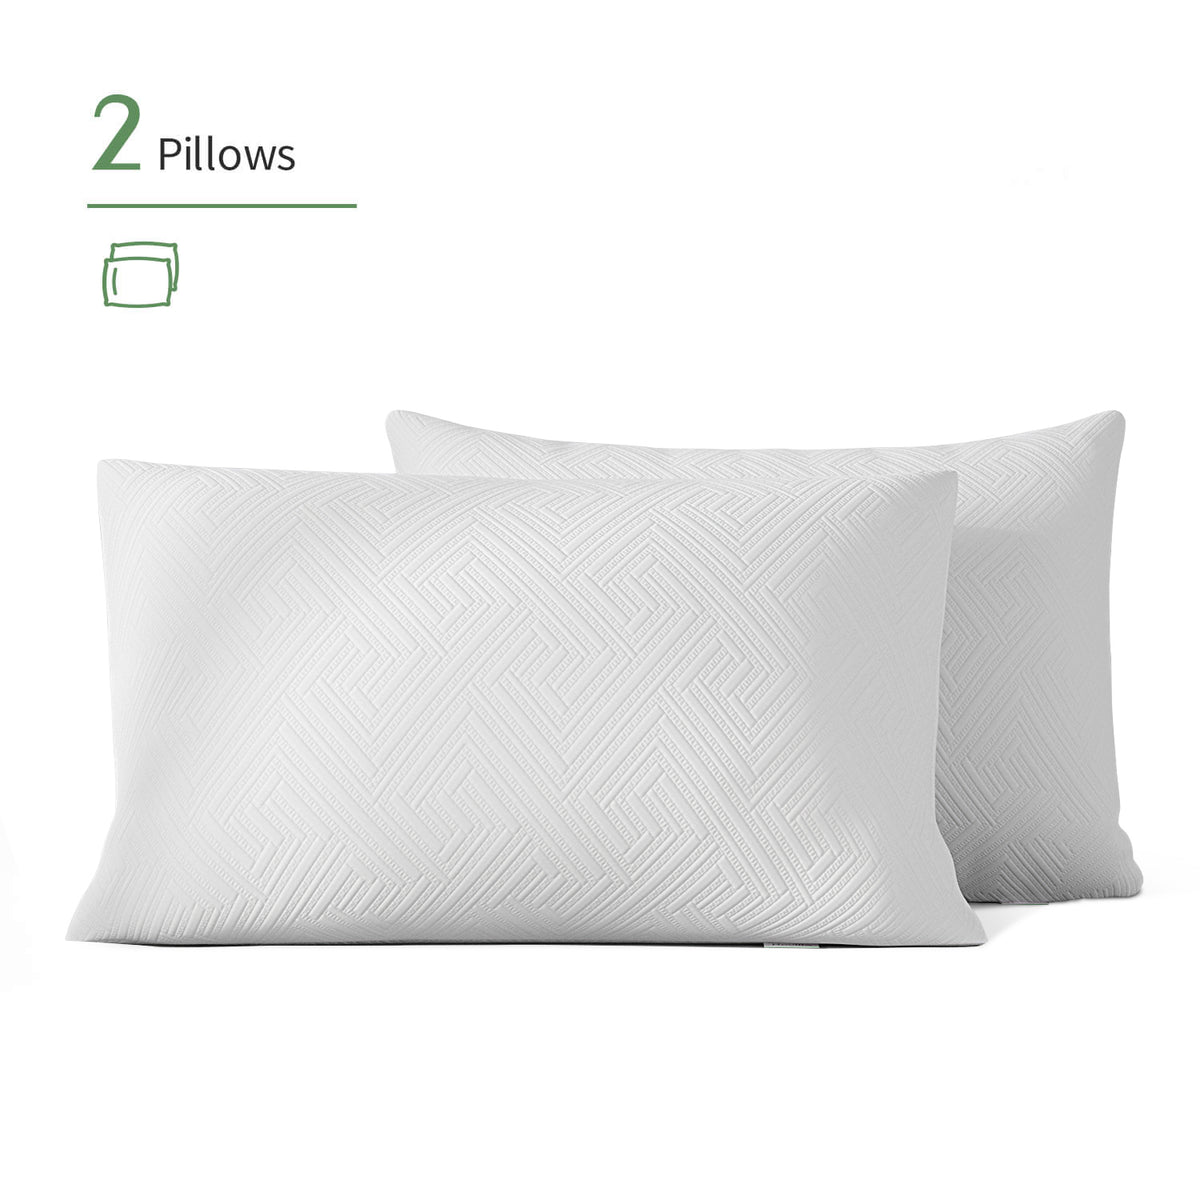 Down Alternative Pillow, Pillows for Side and Back Sleepers, Soft and Supportive